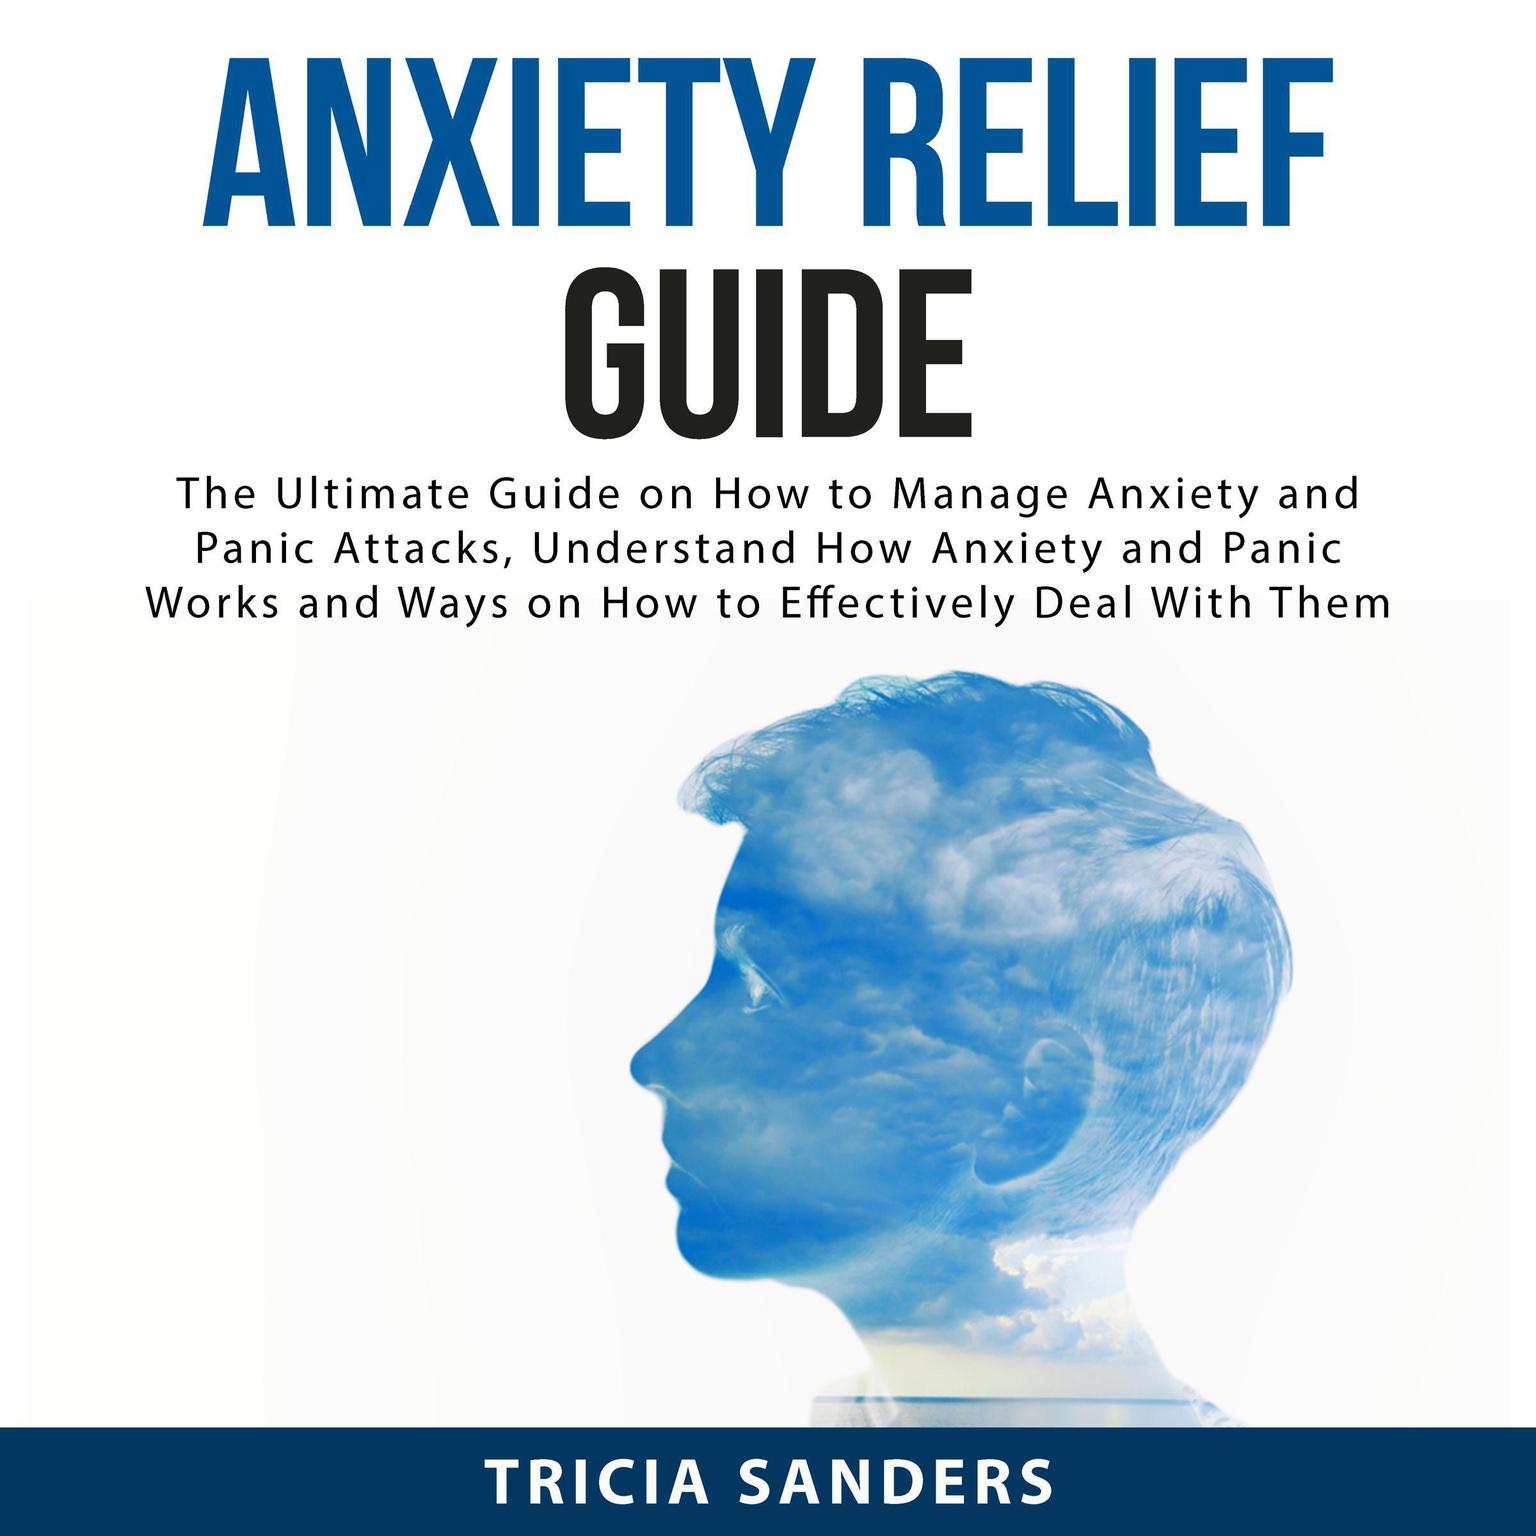 Anxiety Relief Guide: The Ultimate Guide on How to Manage Anxiety and Panic Attacks, Understand How Anxiety and Panic Works and Ways on How to Effectively Deal With Them: The Ultimate Guide on How to Manage Anxiety and Panic Attacks, Understand How Anxiety and Panic Works and Ways on How to Effectively Deal With Them  Audiobook, by Tricia Sanders